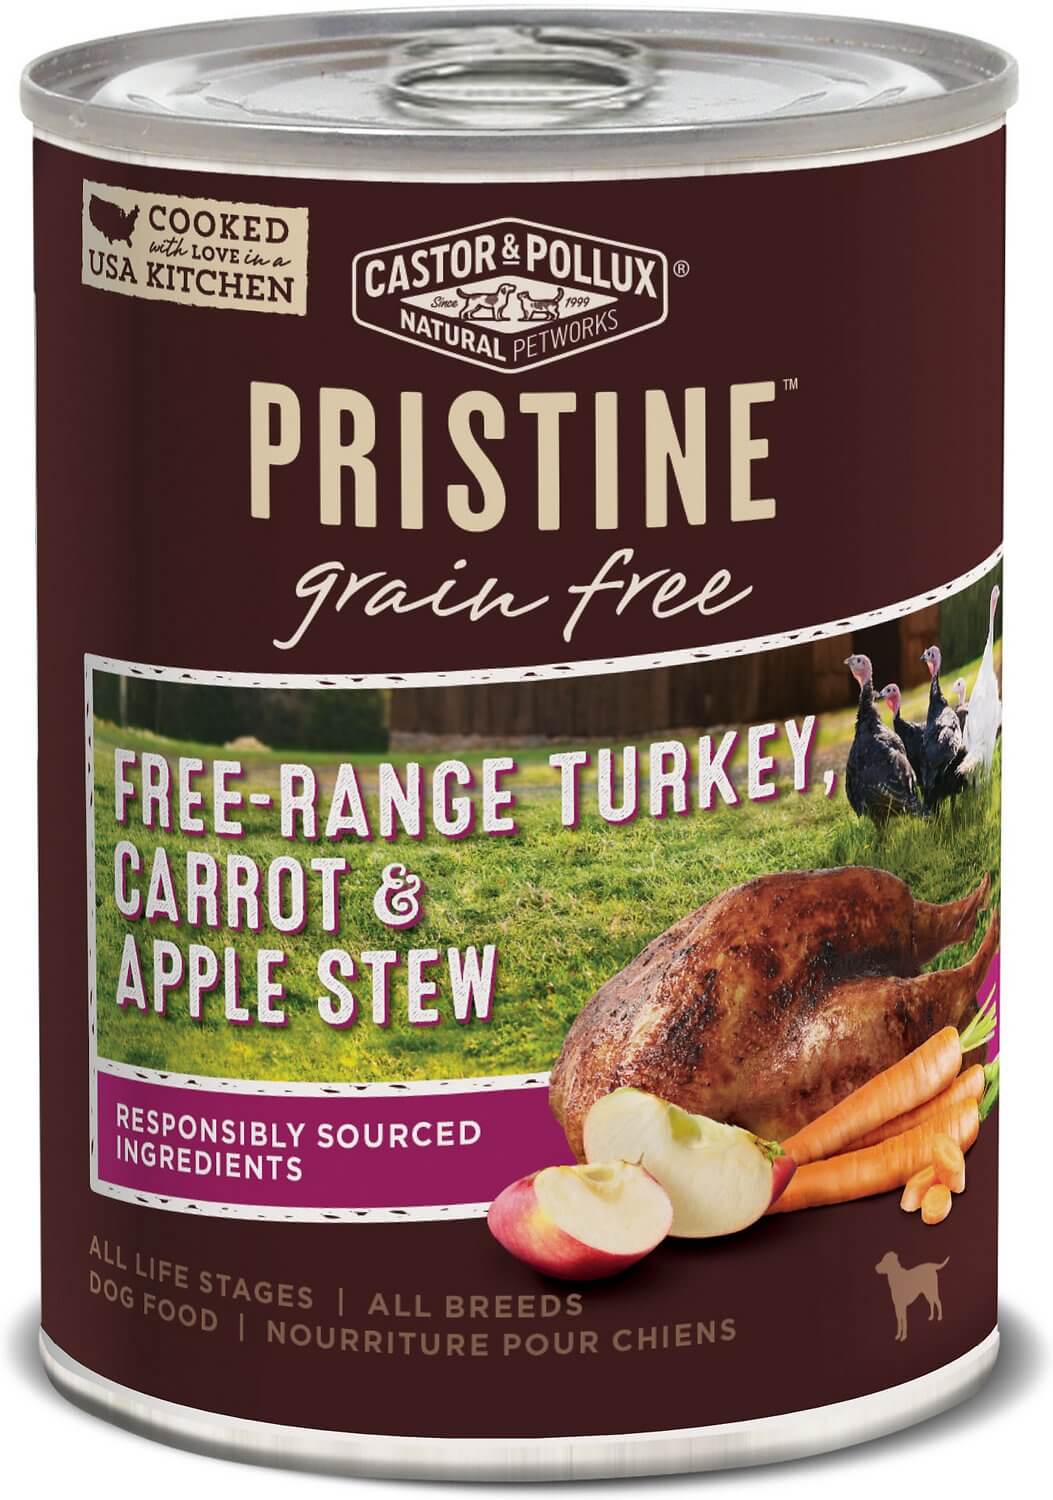 Castor and Pollux Pristine Grain Free Dog Food Review (Canned)